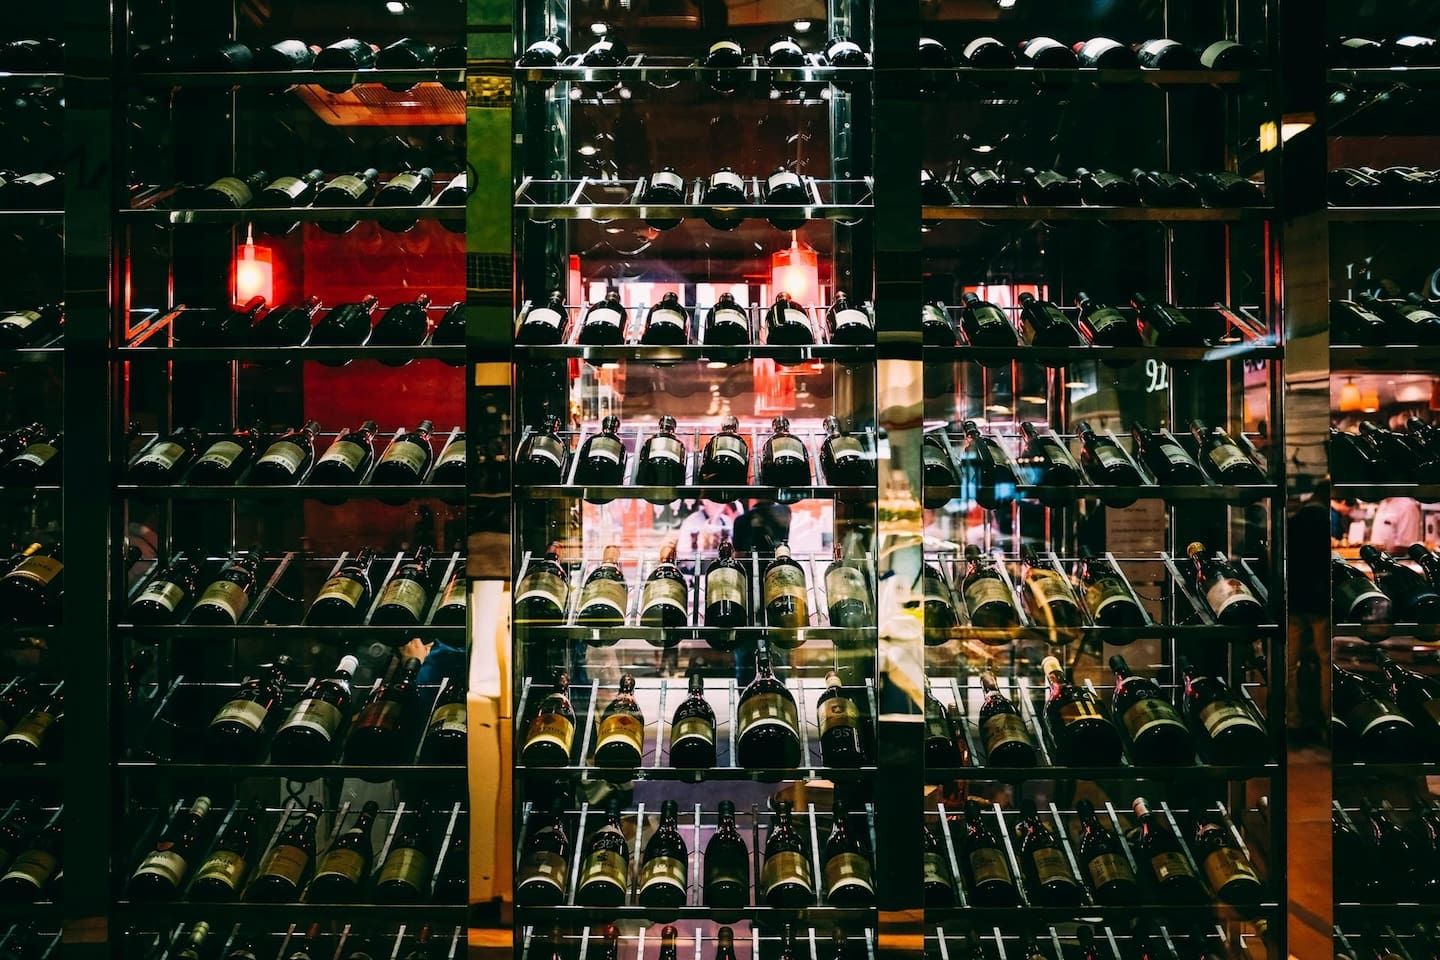 Delaware's liquor stores are facing tough times. Adrien Olichon photo from Pexels.